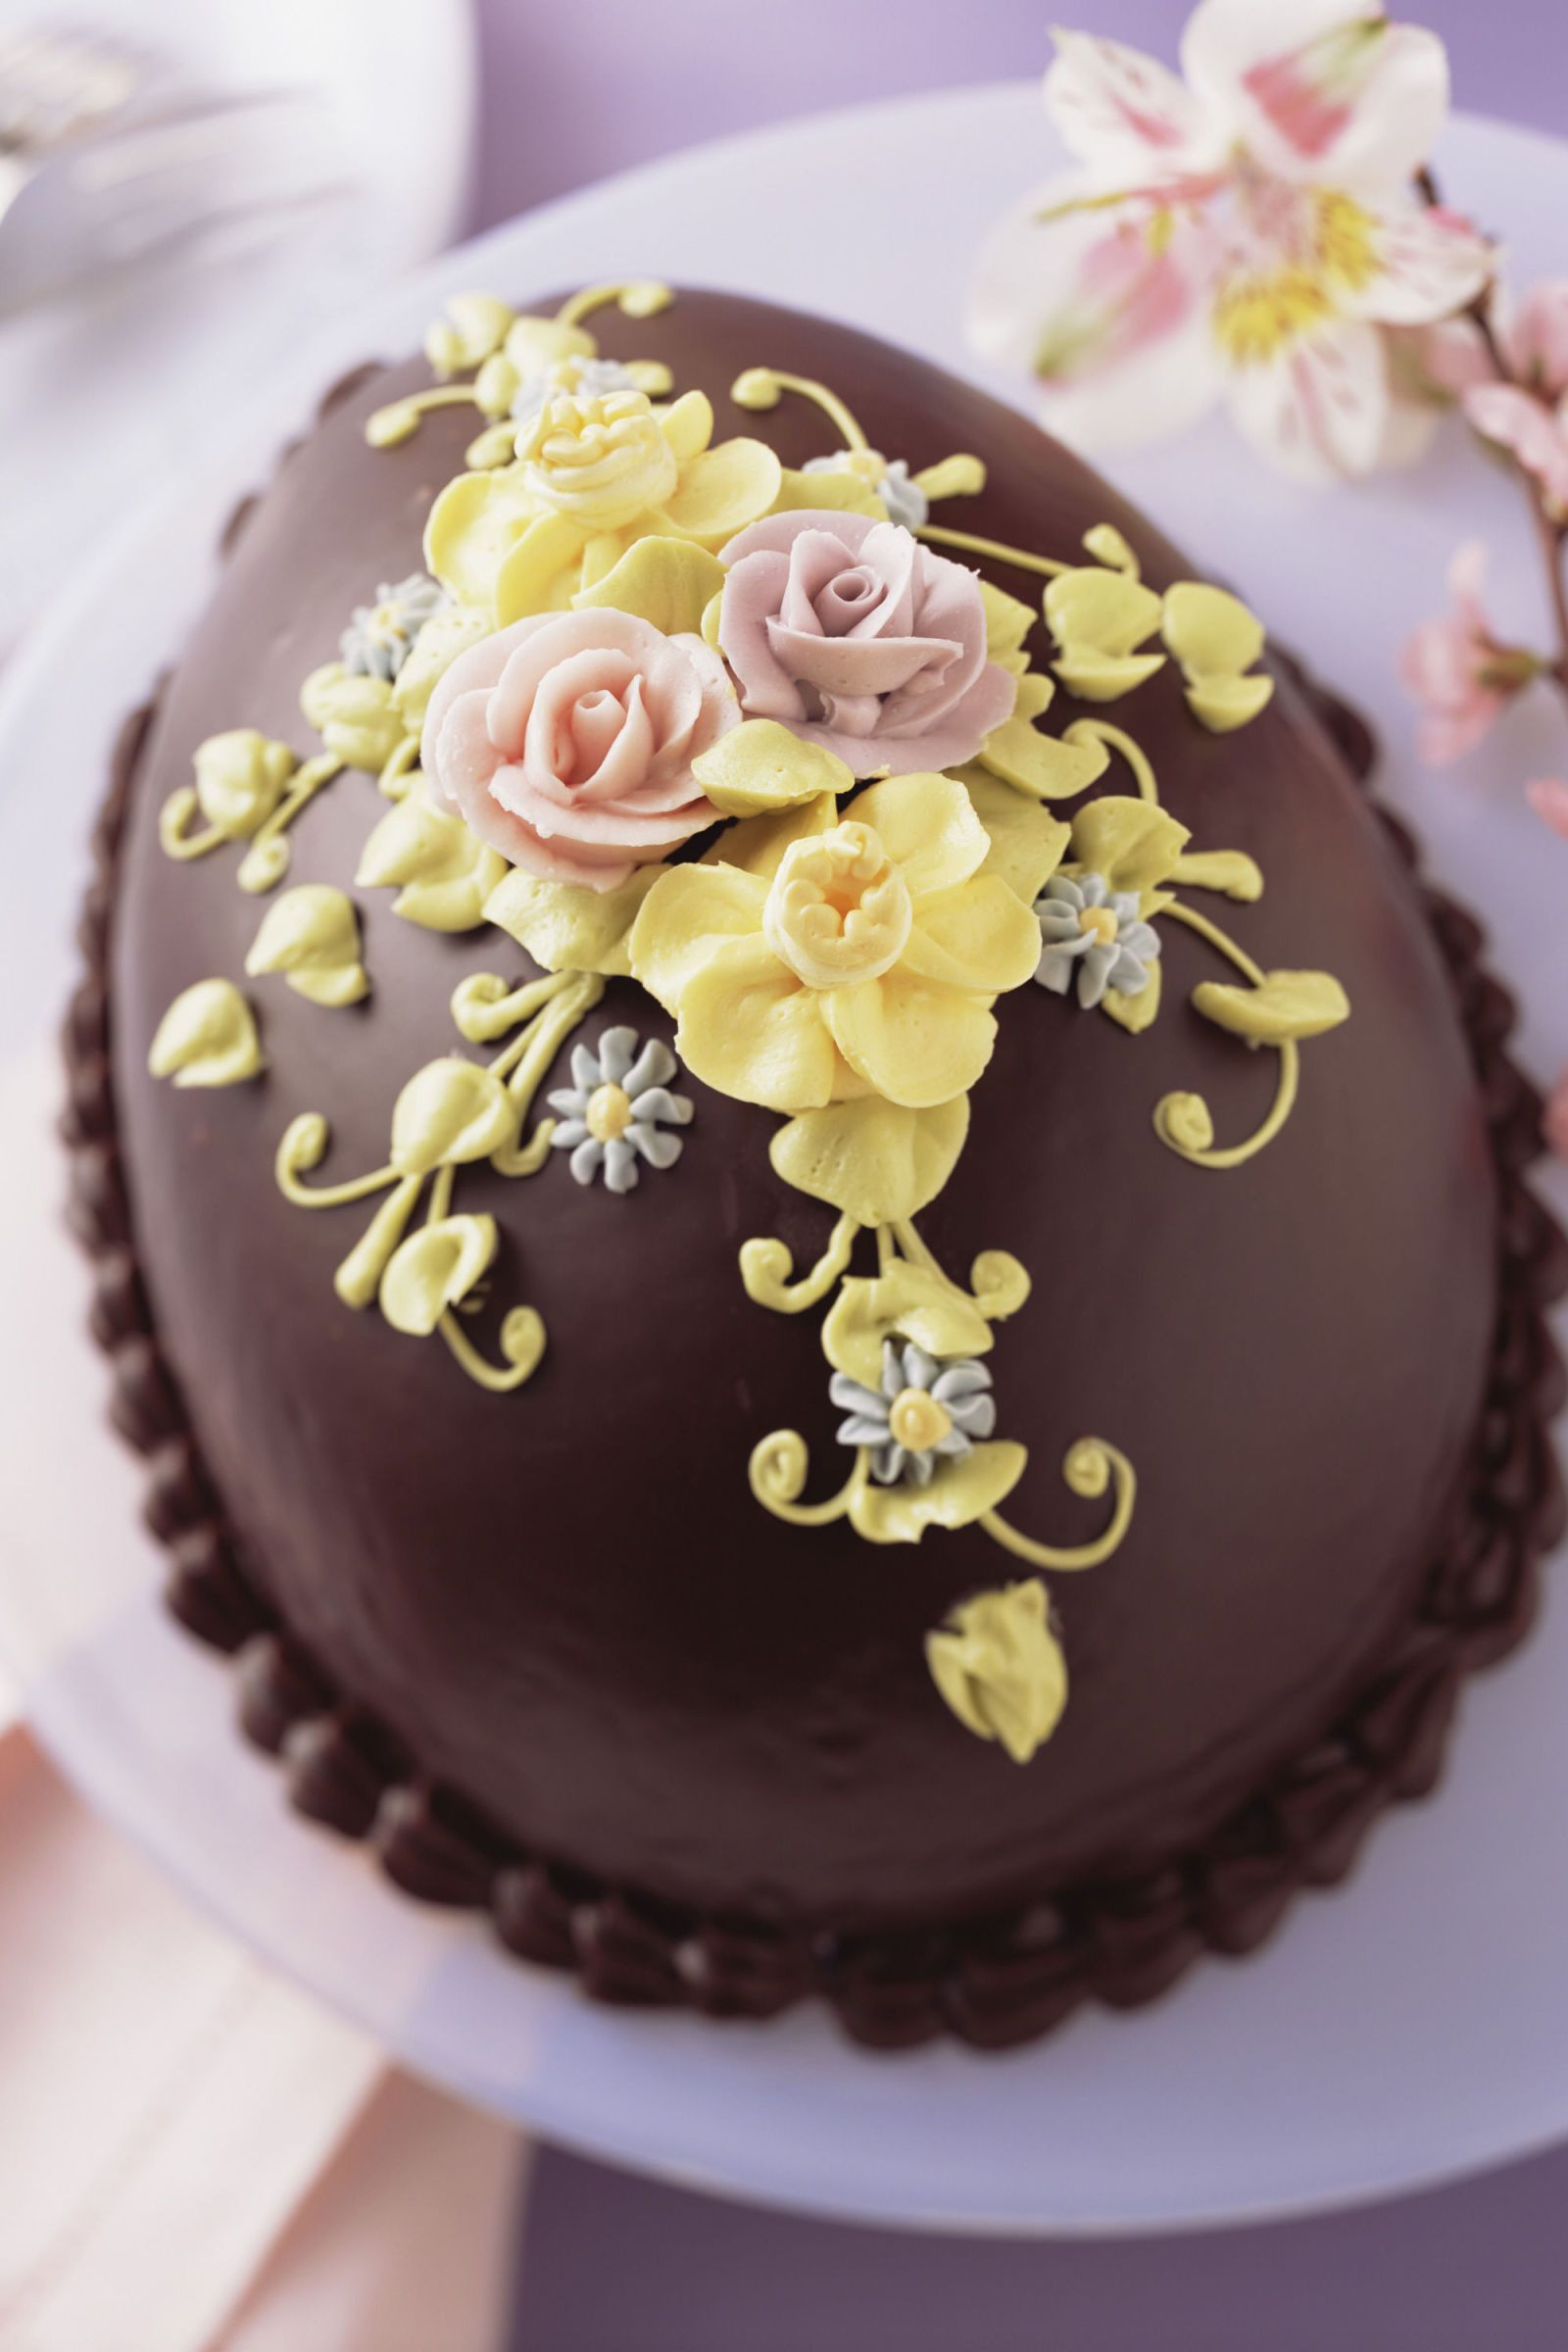 Easter Egg Cake Ideas
 The 35 Most Festive Easter Decorations for Your Home